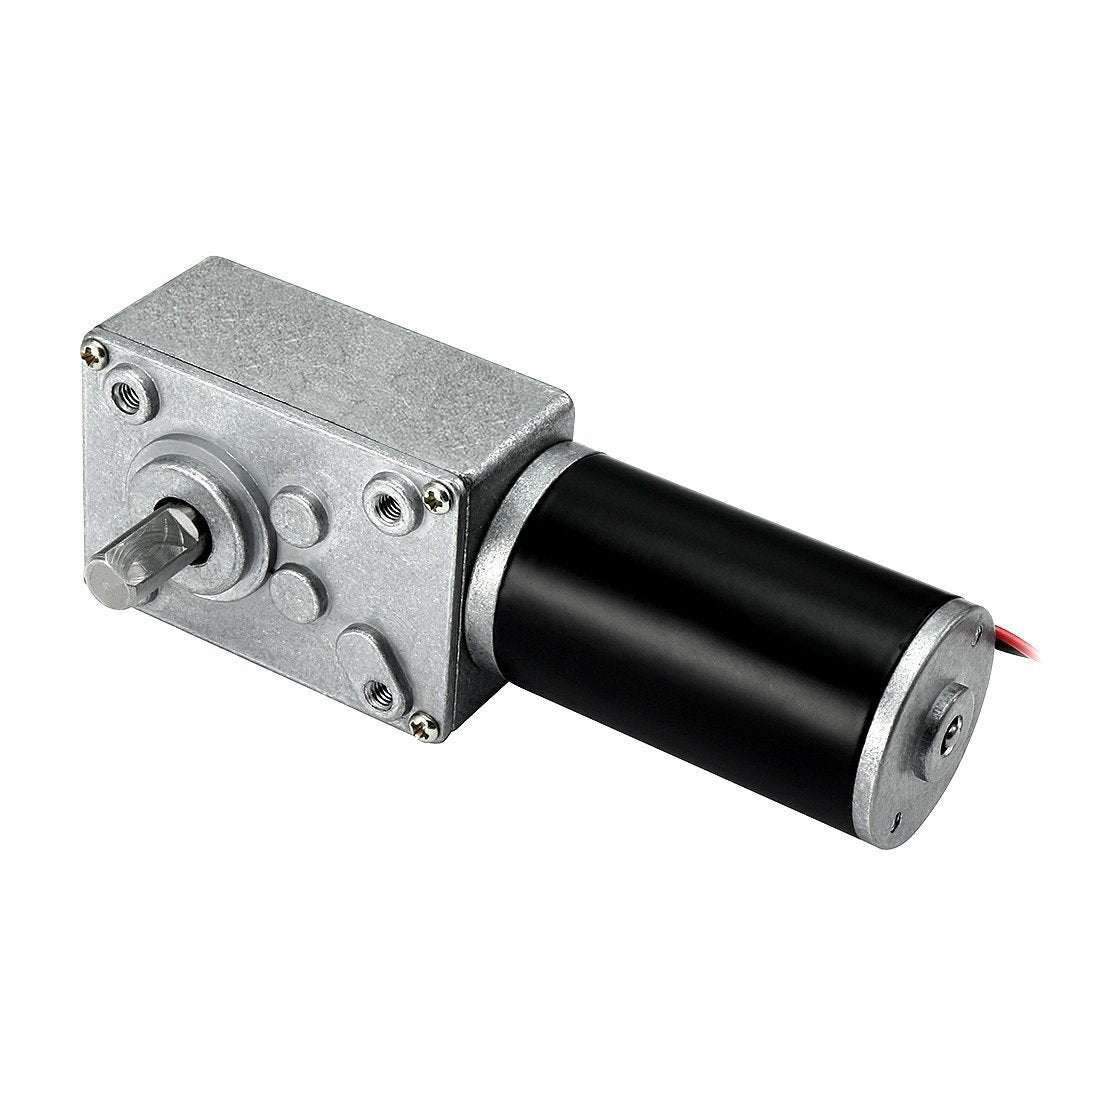 uxcell Uxcell DC 24V 25RPM High Torque Electric Power Speed Reduce Turbine Worm Gear Box Motor